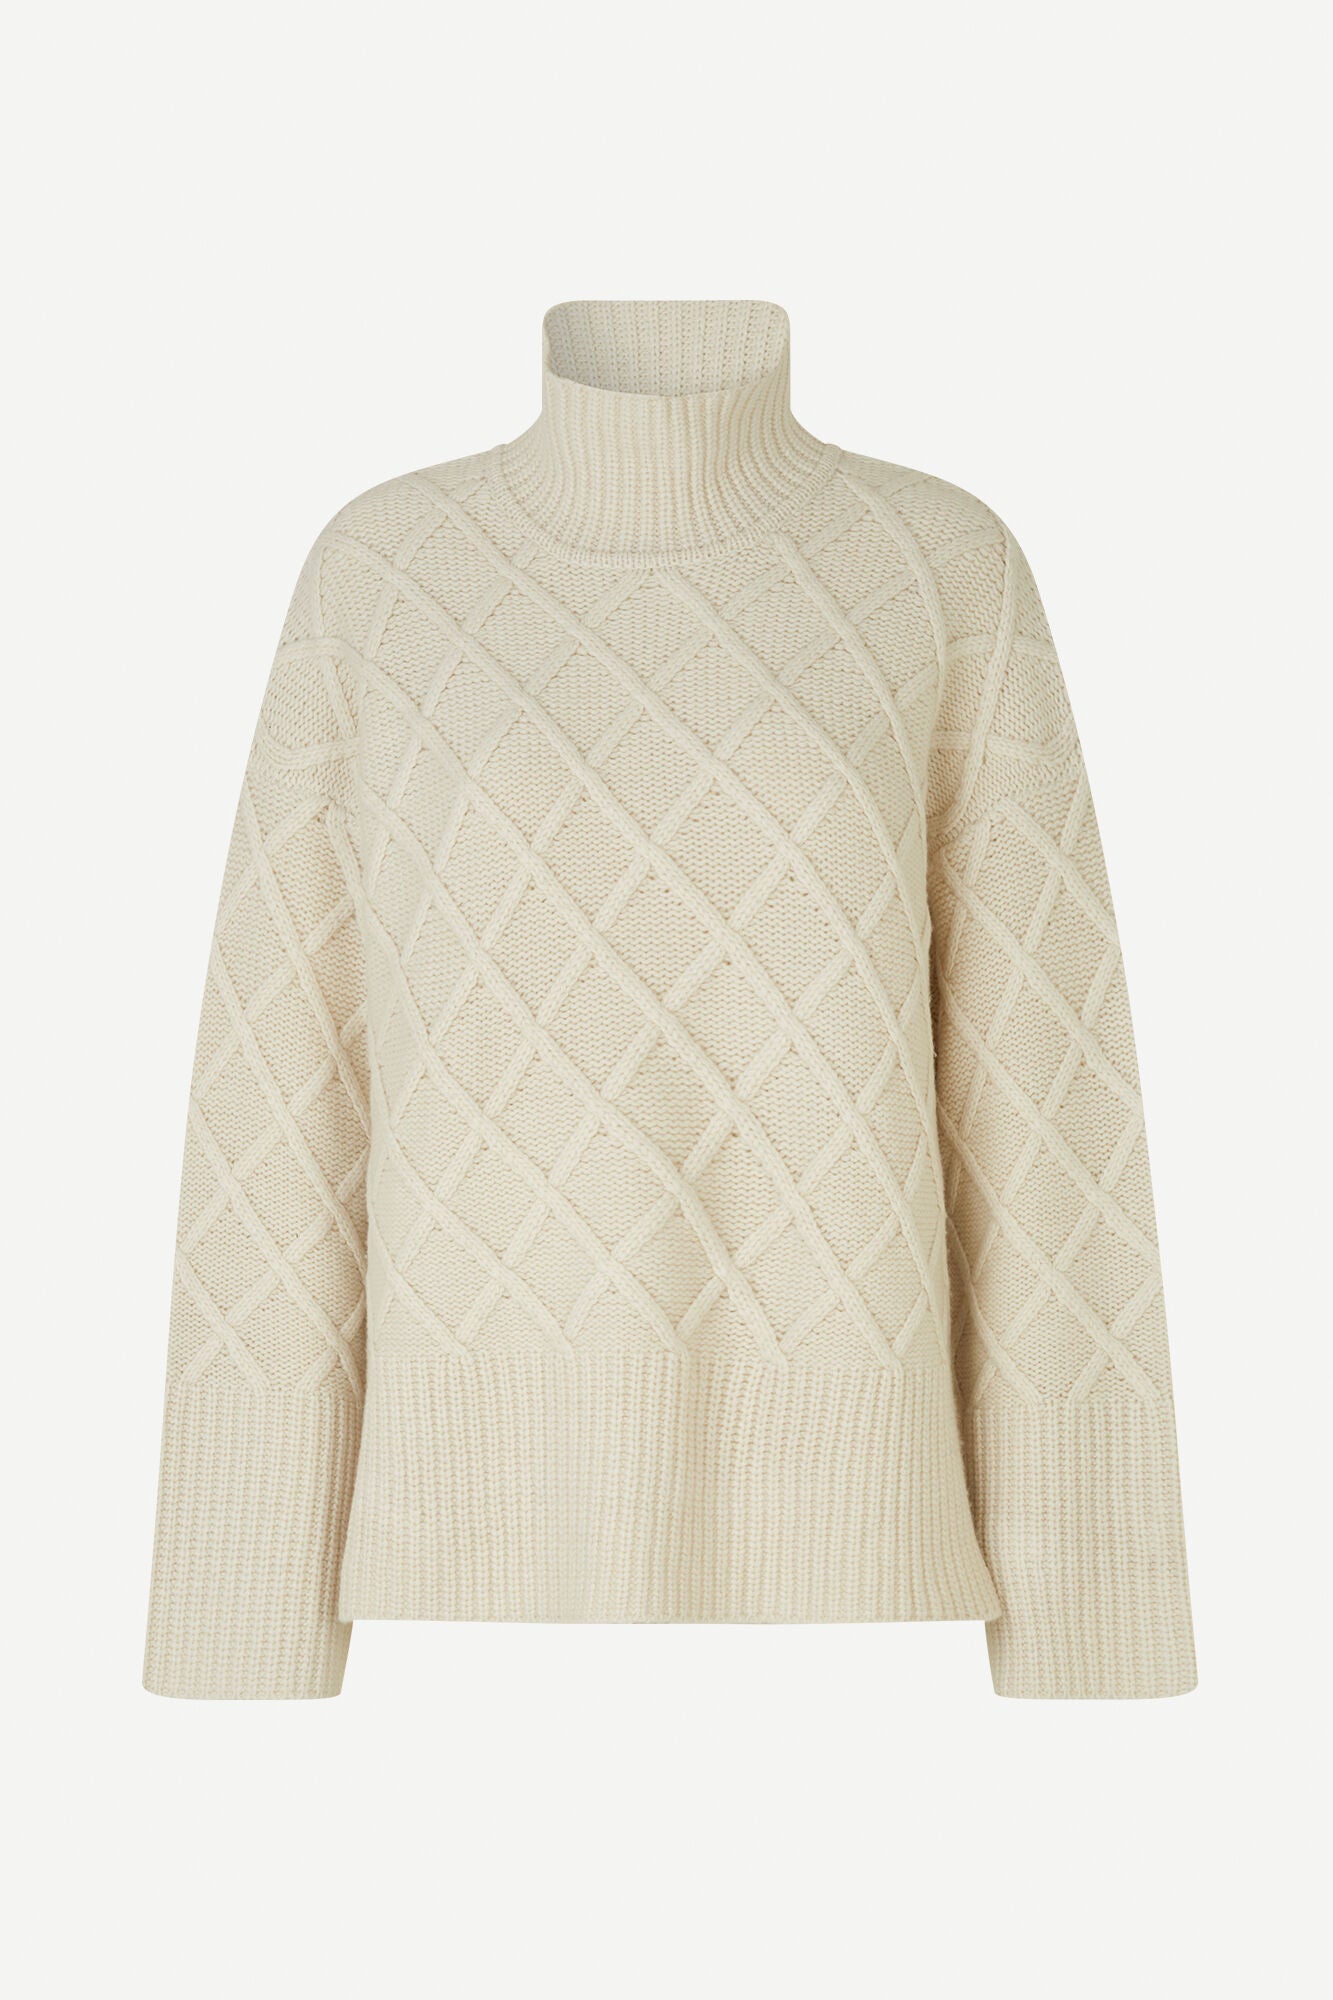 Turtle neck ecru cable knit jumper with wide ribbed hem cuffs long sleeves and two side vents 